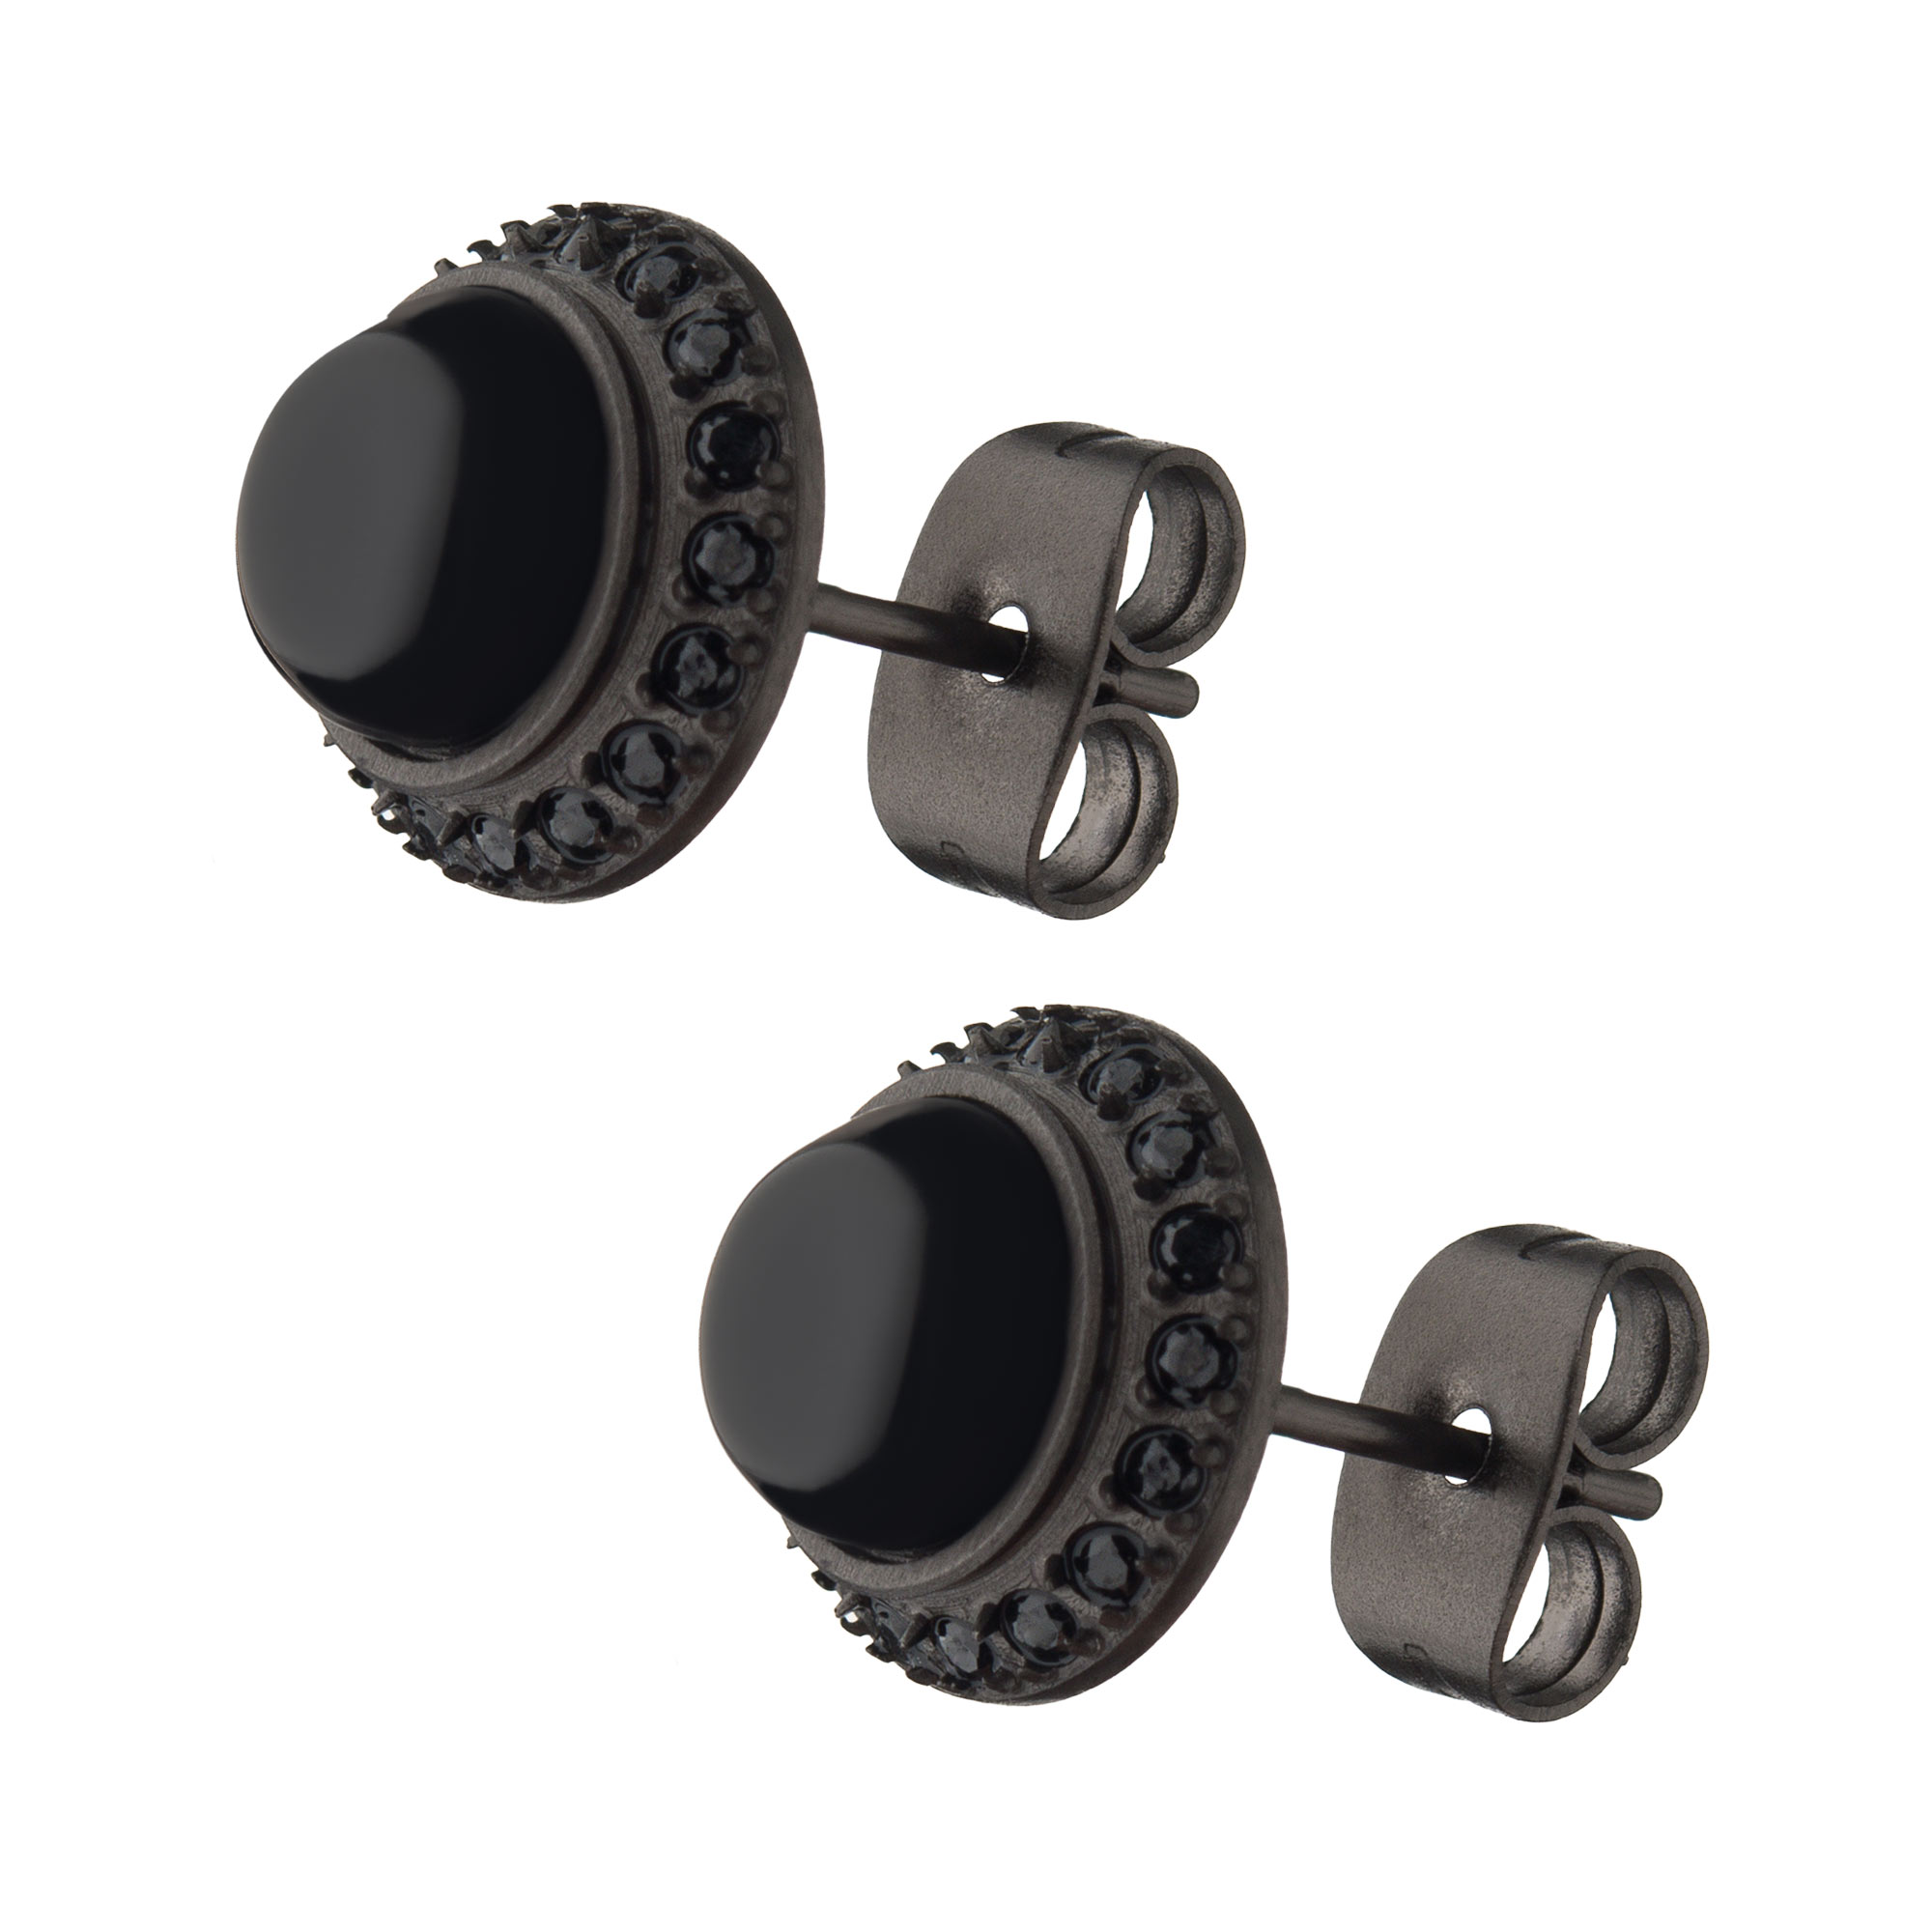 Stainless Steel Antique Bronze Plated with Black CZ Stud Earrings Image 2 Midtown Diamonds Reno, NV